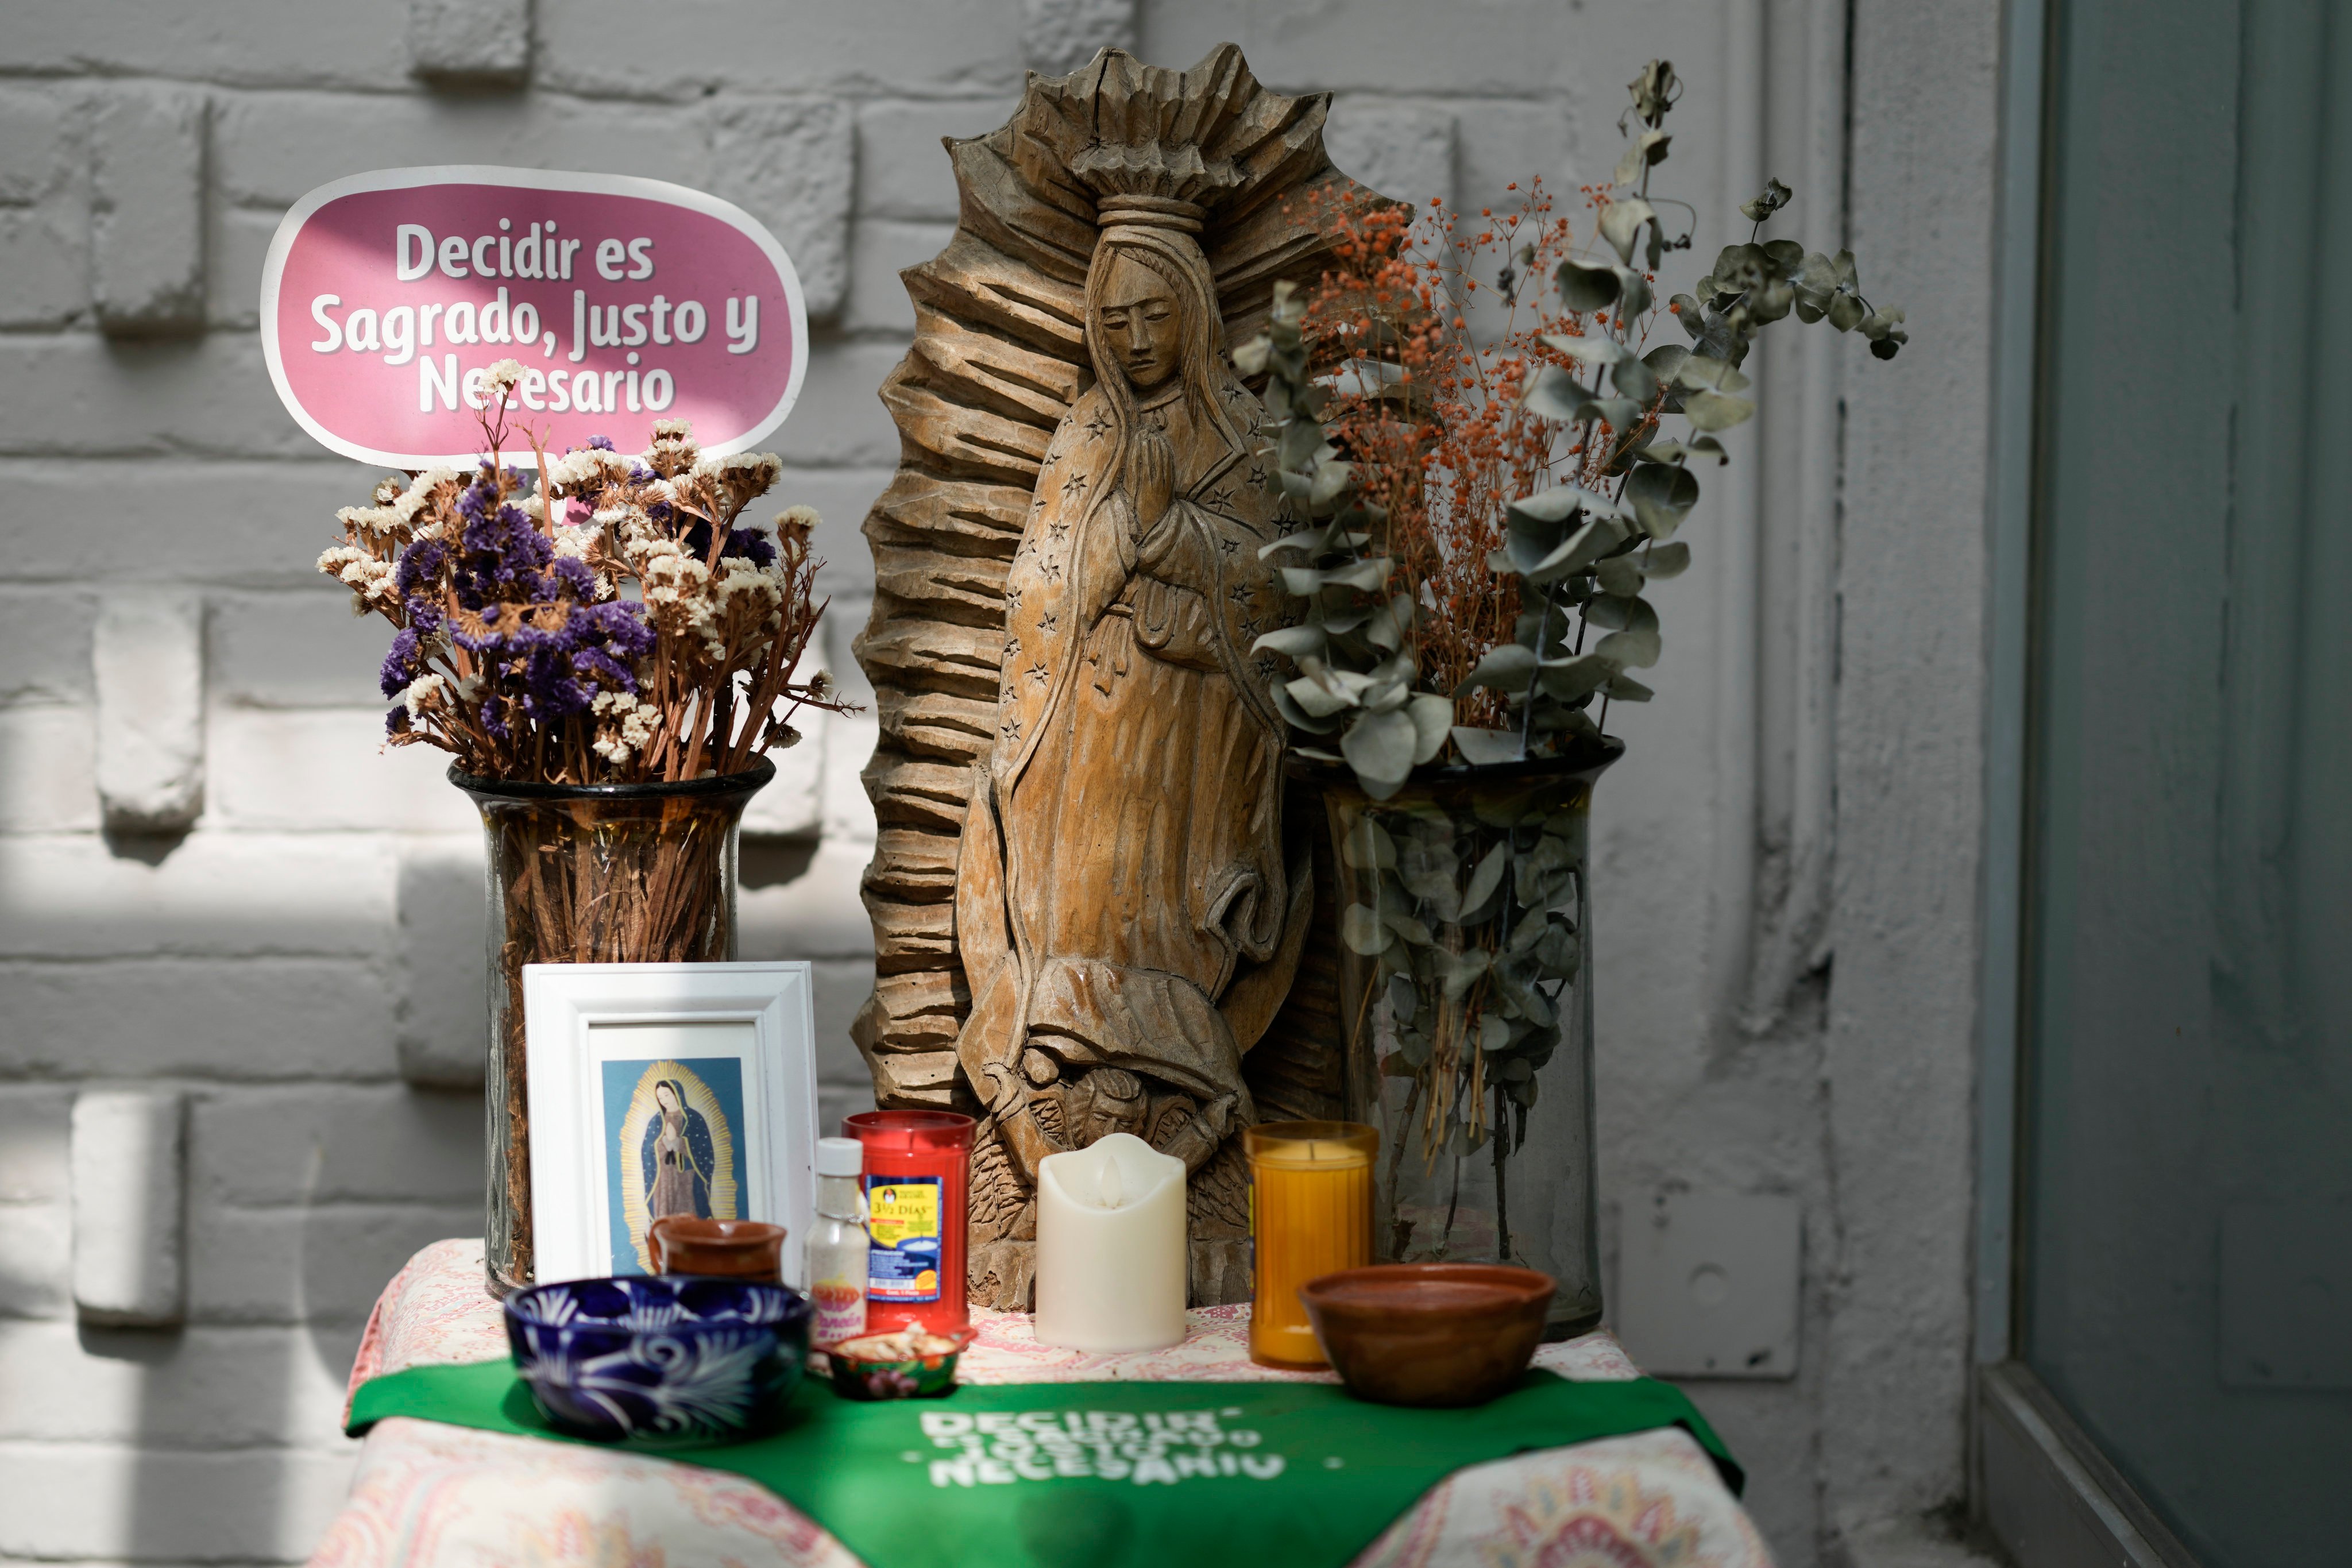 A green scarf with a message that reads in Spanish: “To decide is sacred, just and necessary” adorns an altar to the Virgin Mary, in the office of the Catholics for the Right to Decide, in Mexico City. Photo: AP